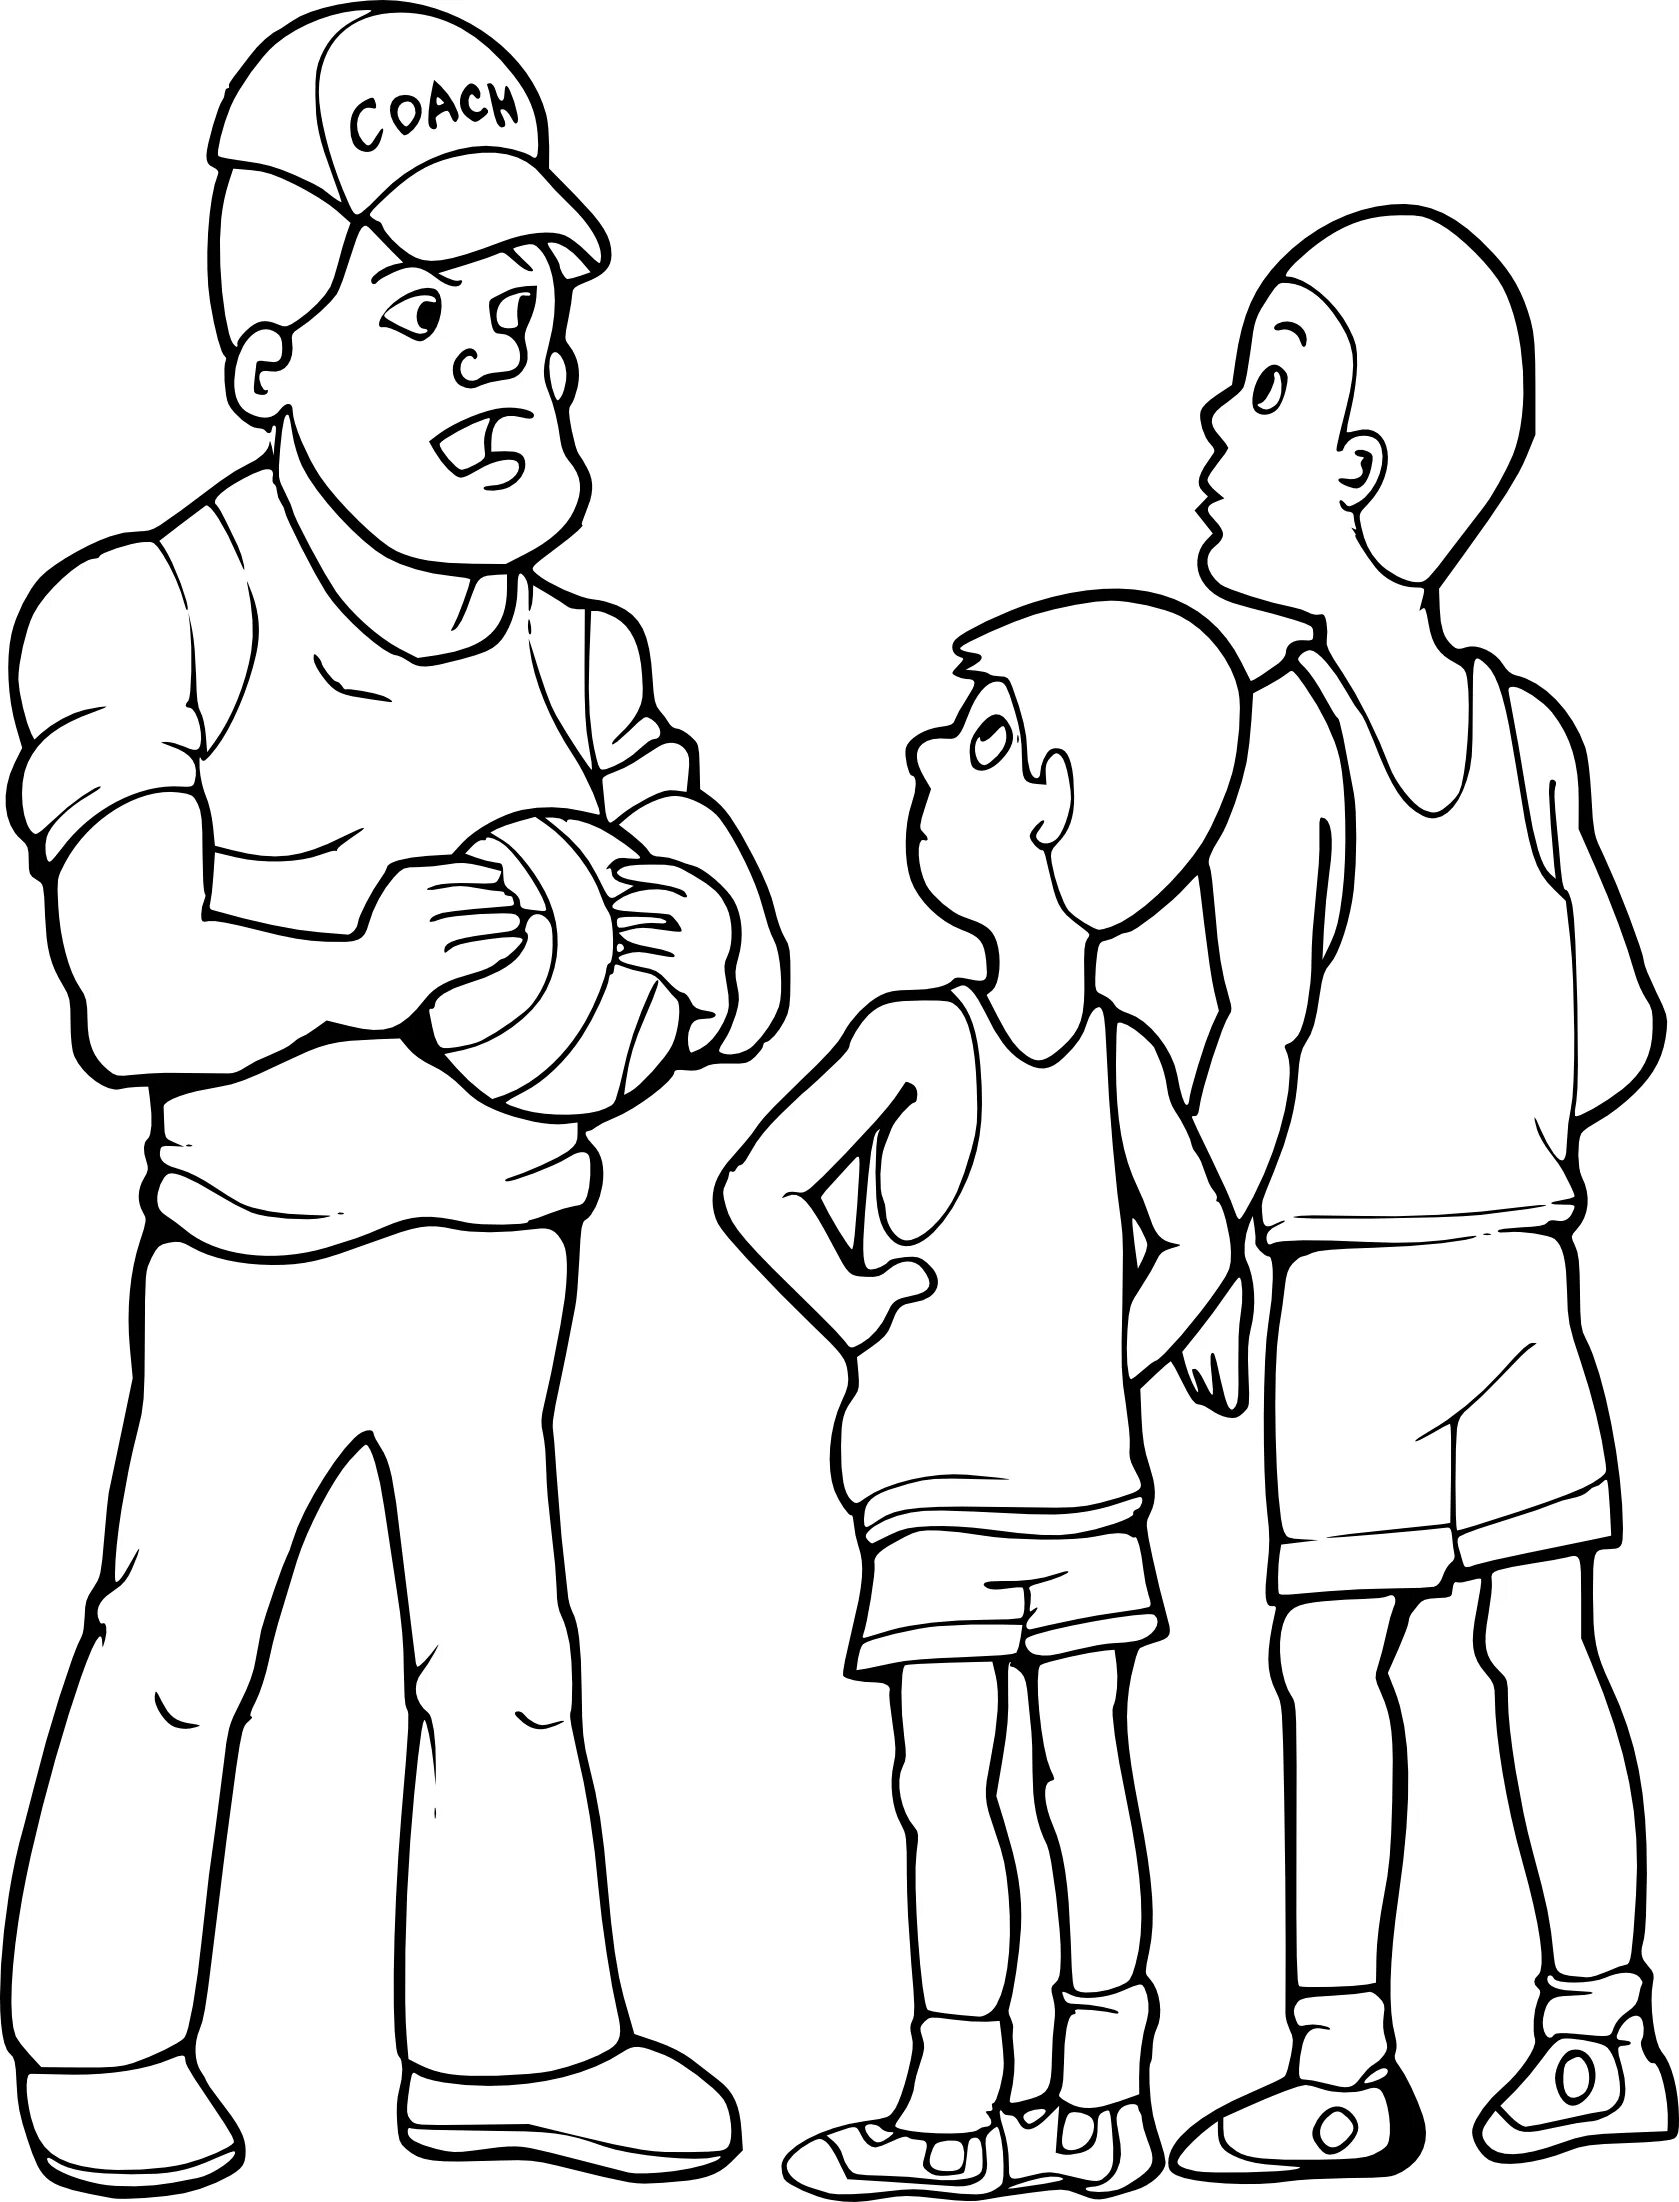 Great coach coloring book